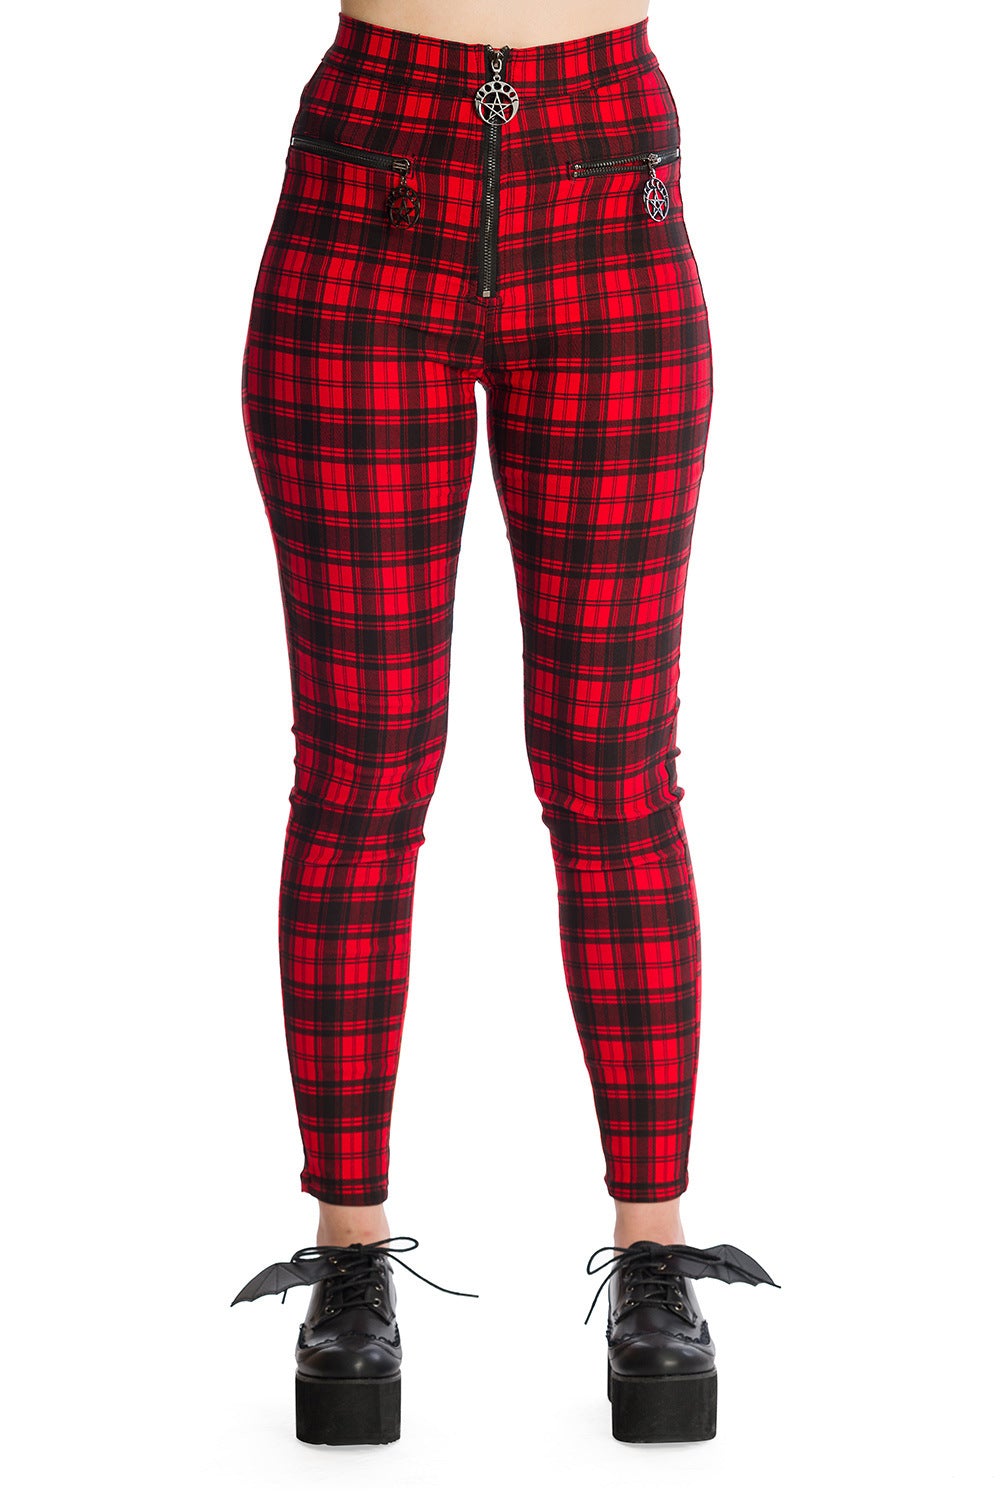 High waisted red check trousers with pentagram zip details. 